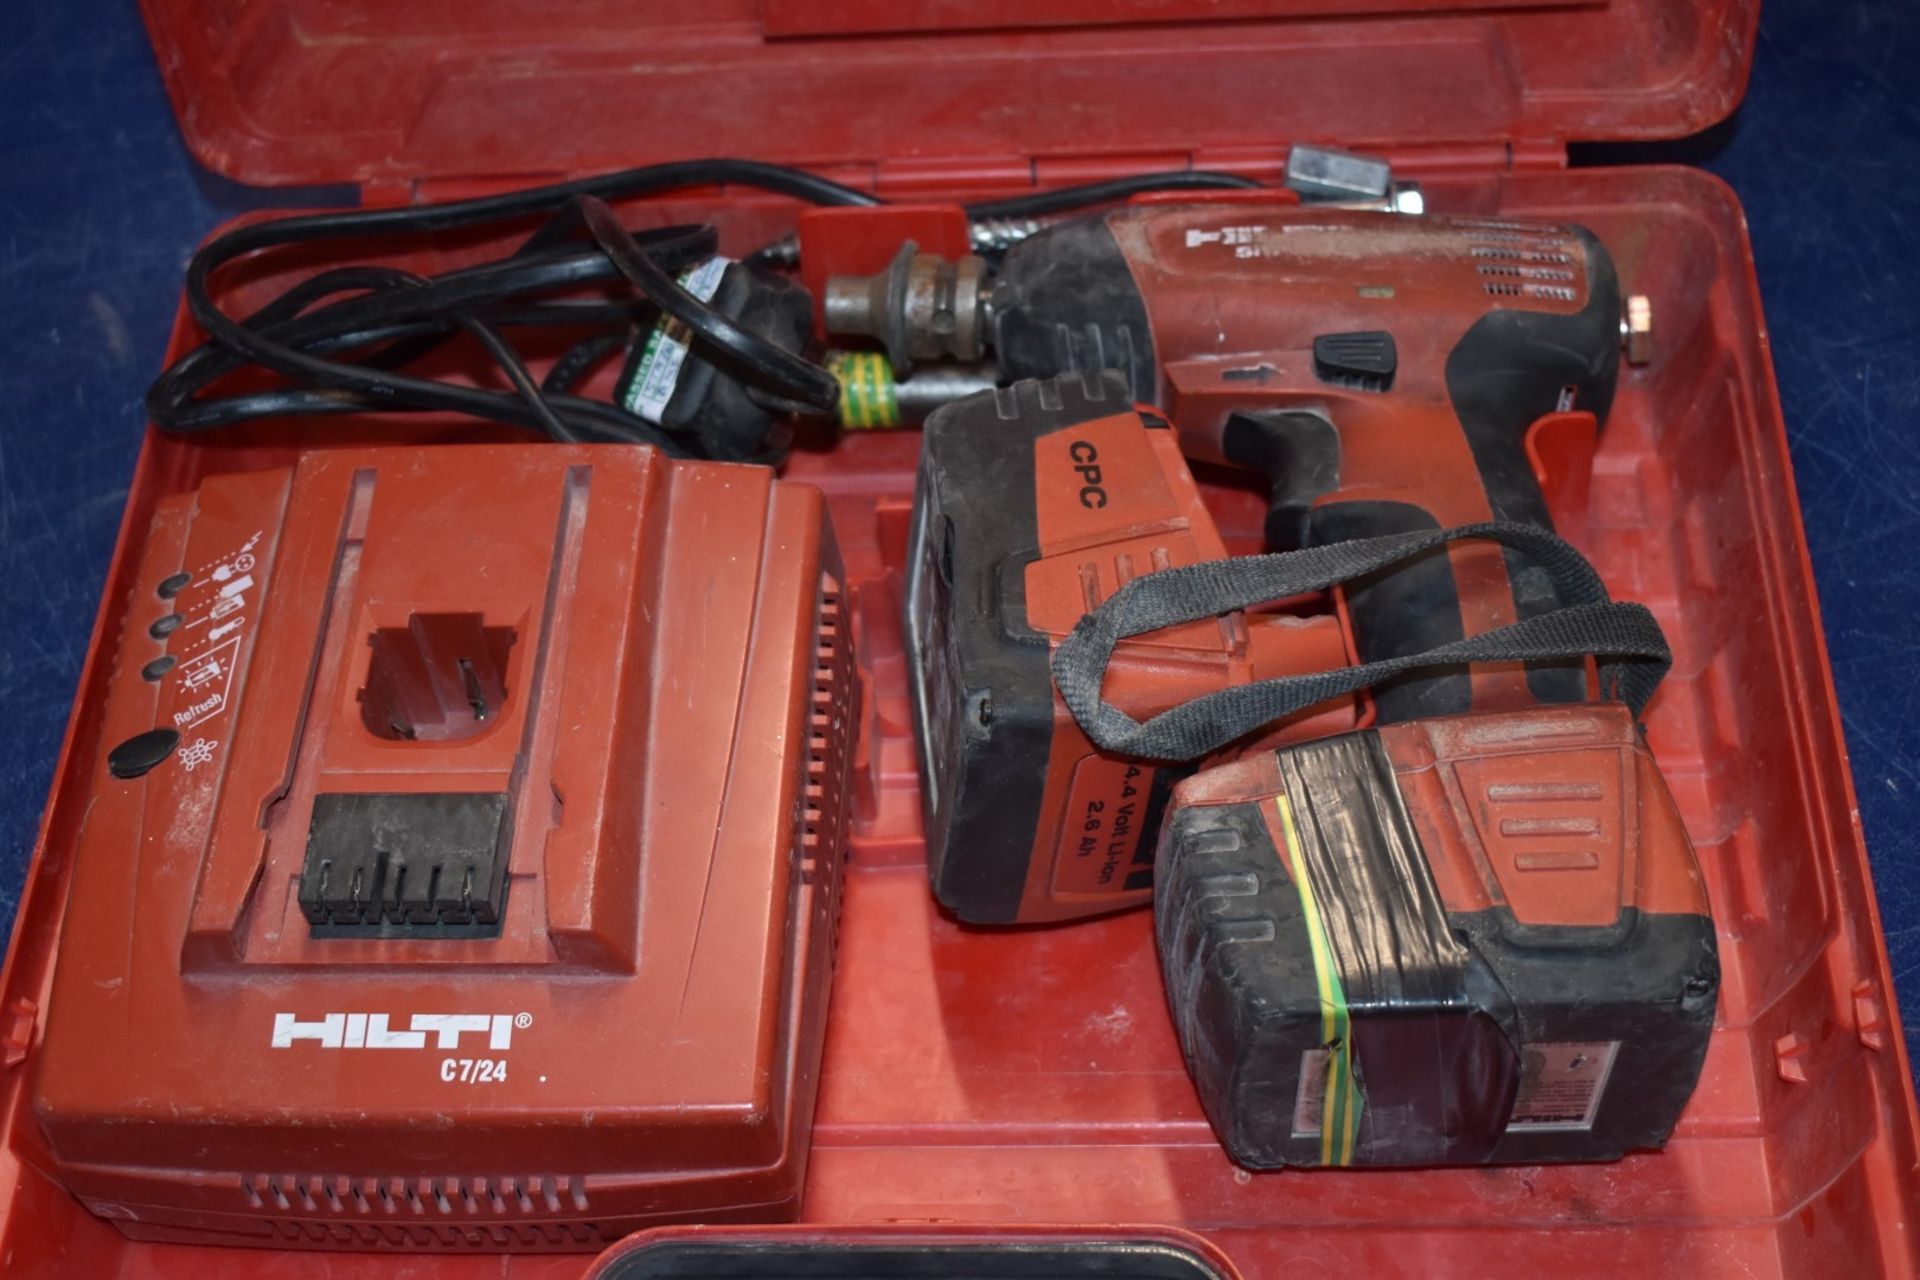 1 x Hilti SIW 144A Cordless Impact Wrench With Charger, Two Batteries and Carry Case - Image 5 of 5